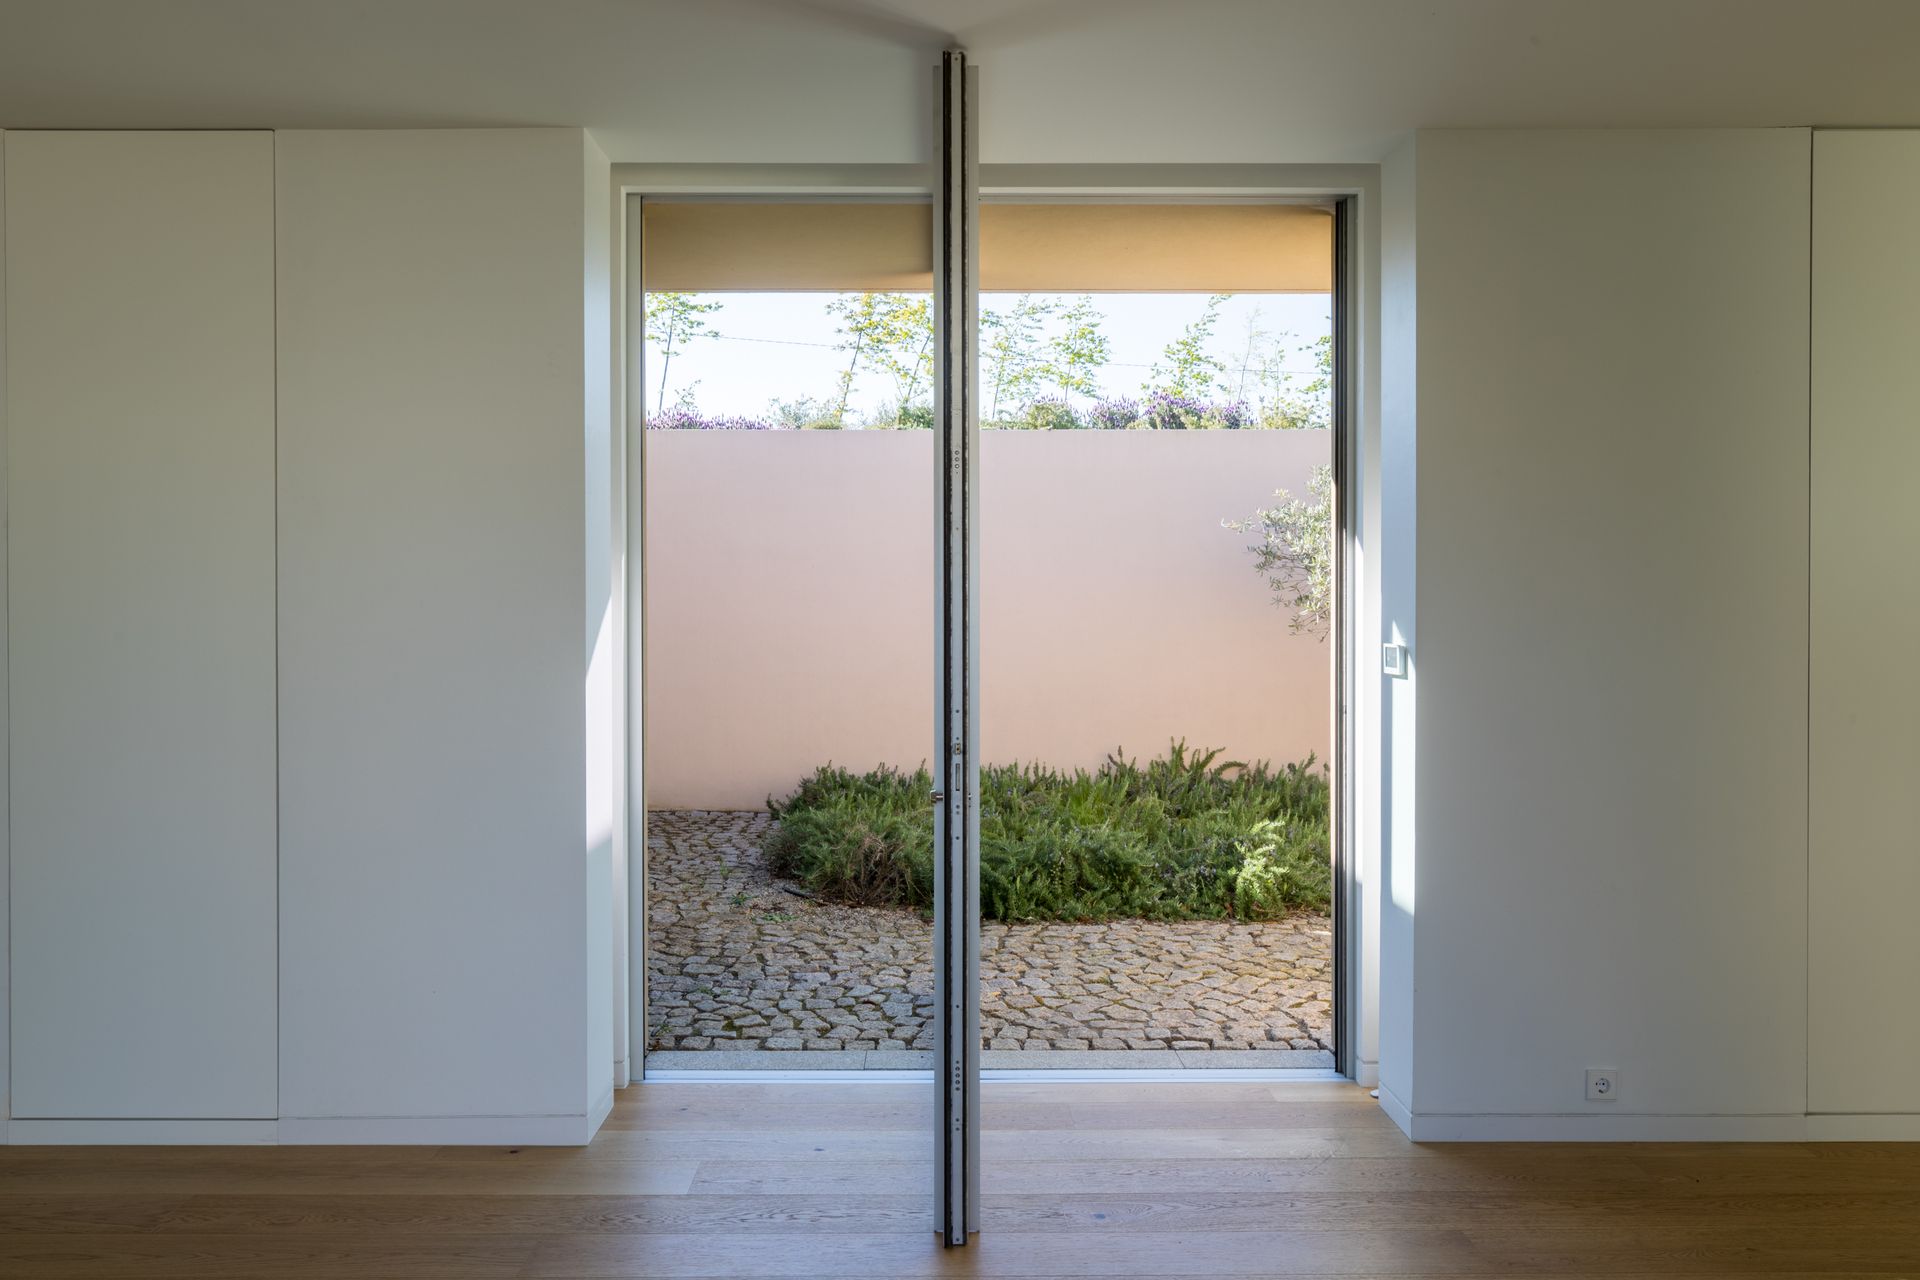 Modern room with a sliding door overlooking a garden. Minimalist window frame and architecture